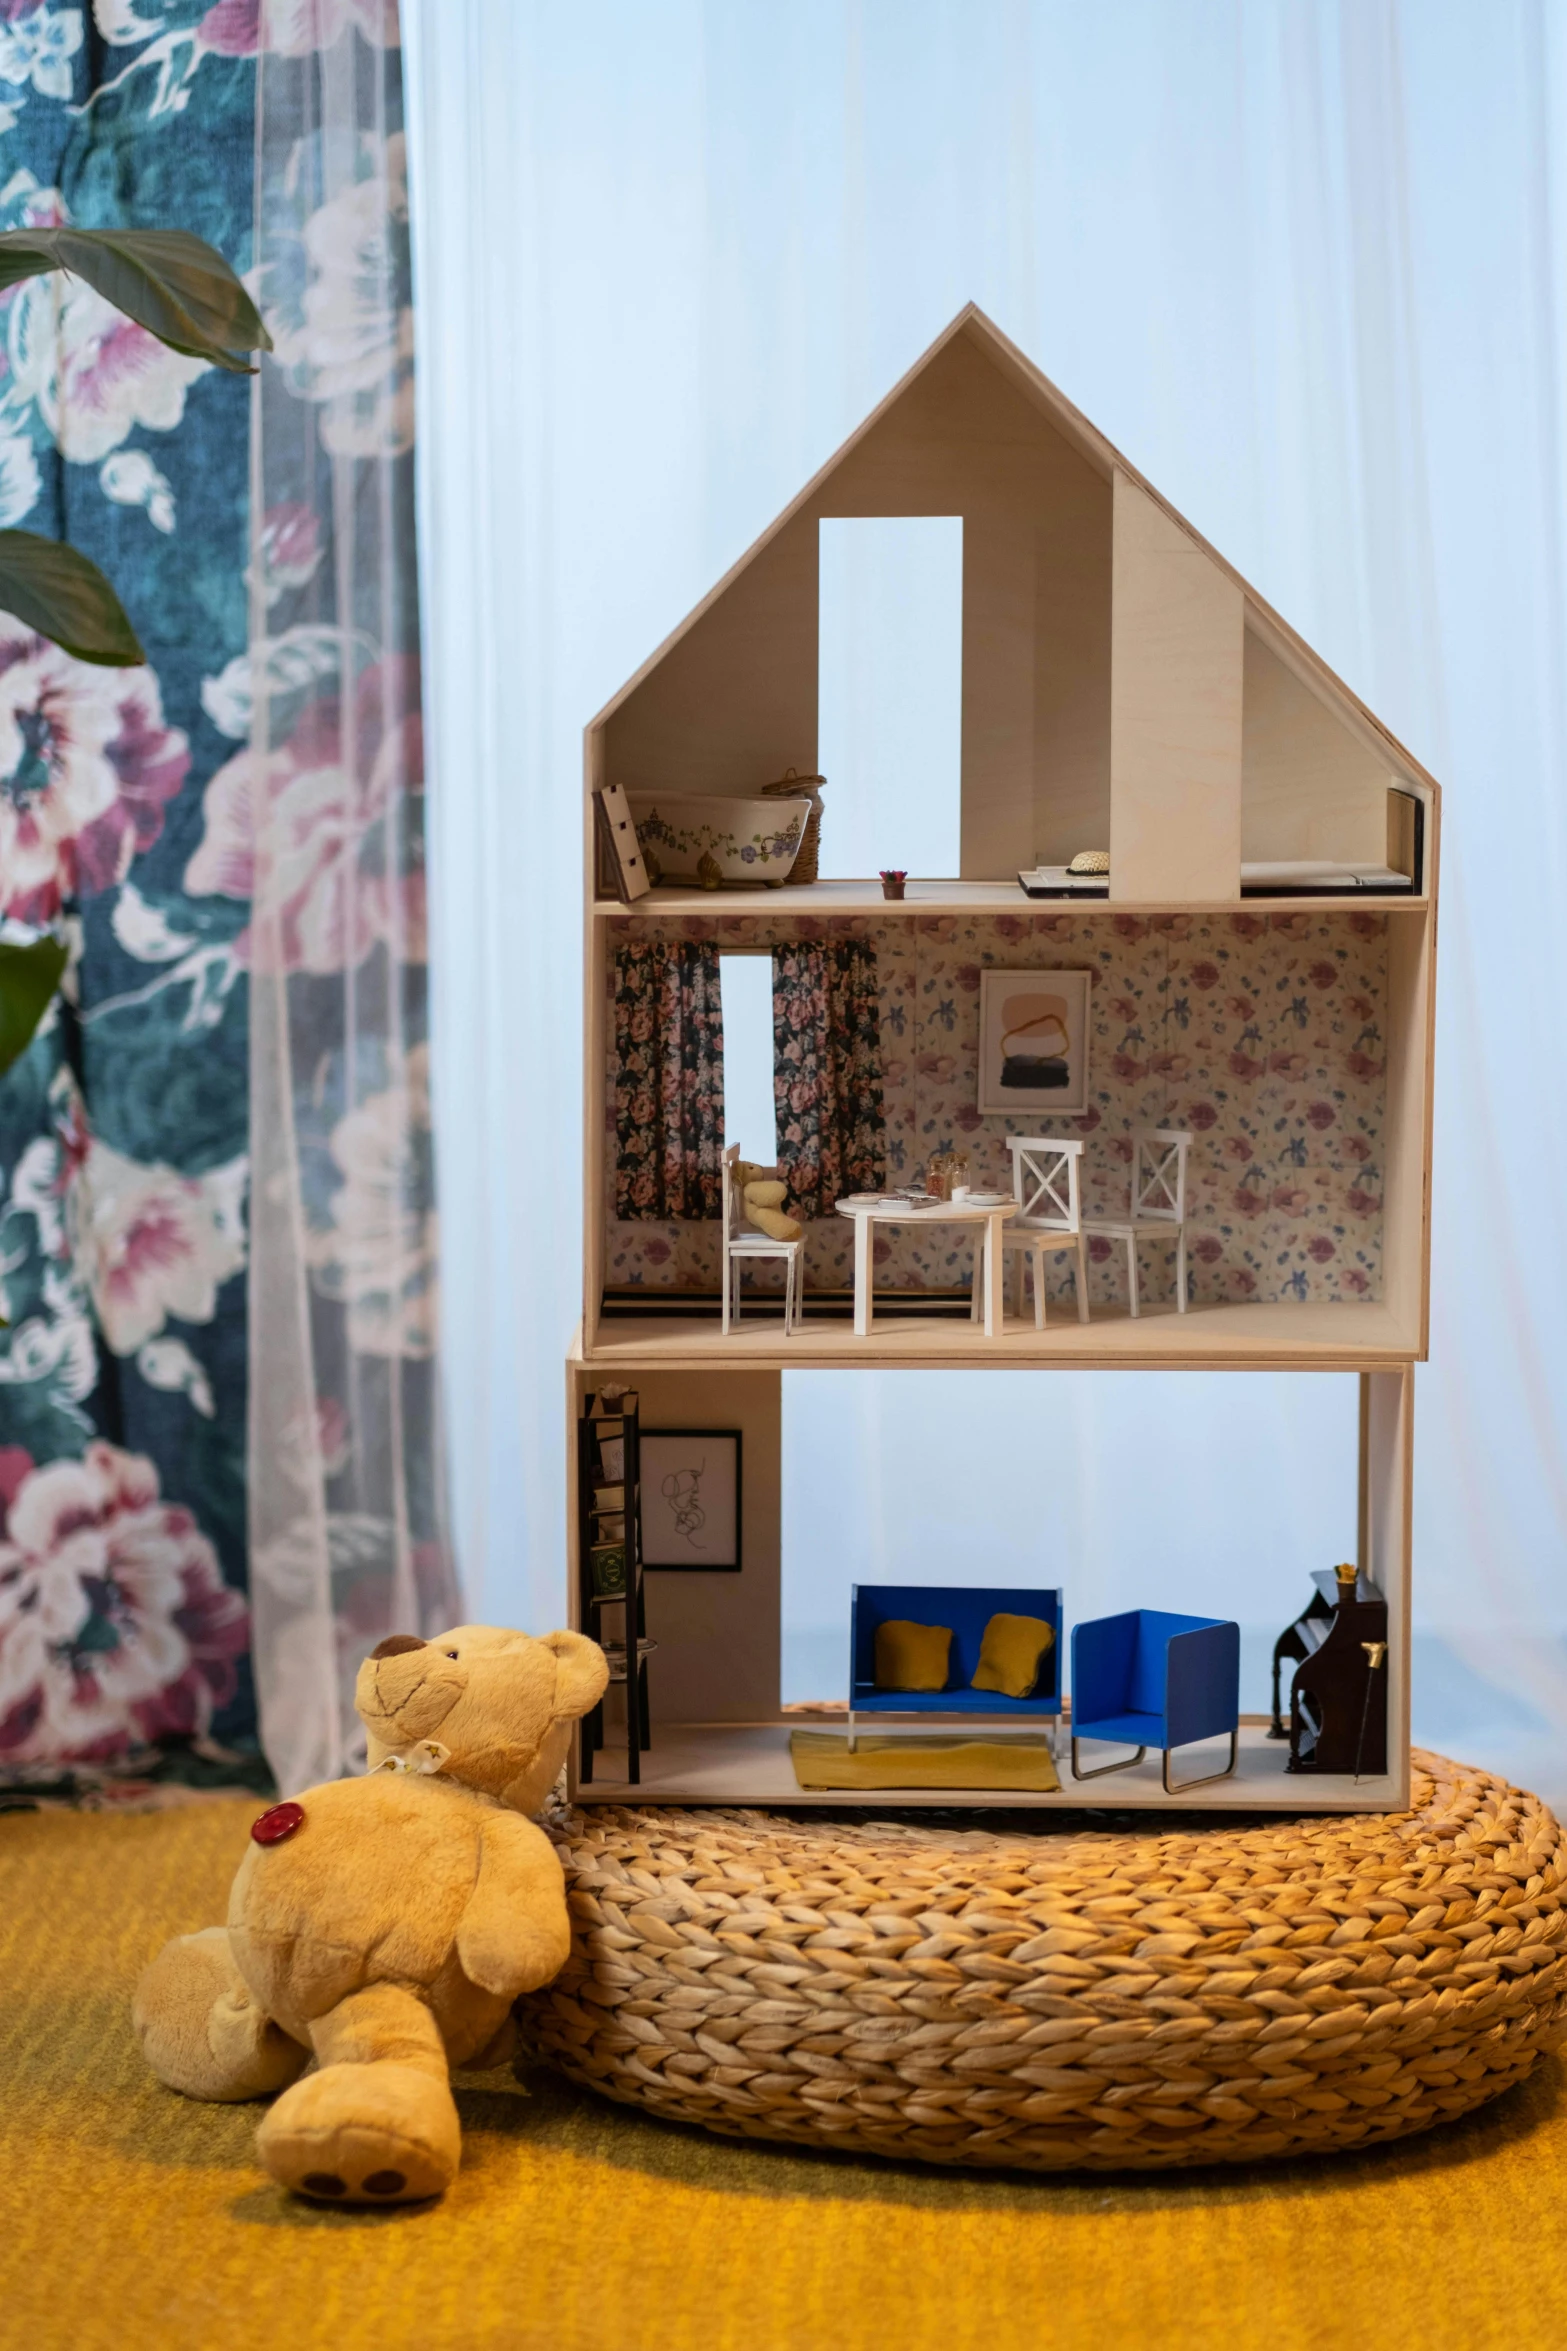 a teddy bear sitting in front of a doll house, a picture, by Zofia Stryjenska, unsplash, modernism, made of cardboard, ikea, detailed product image, interior of a small